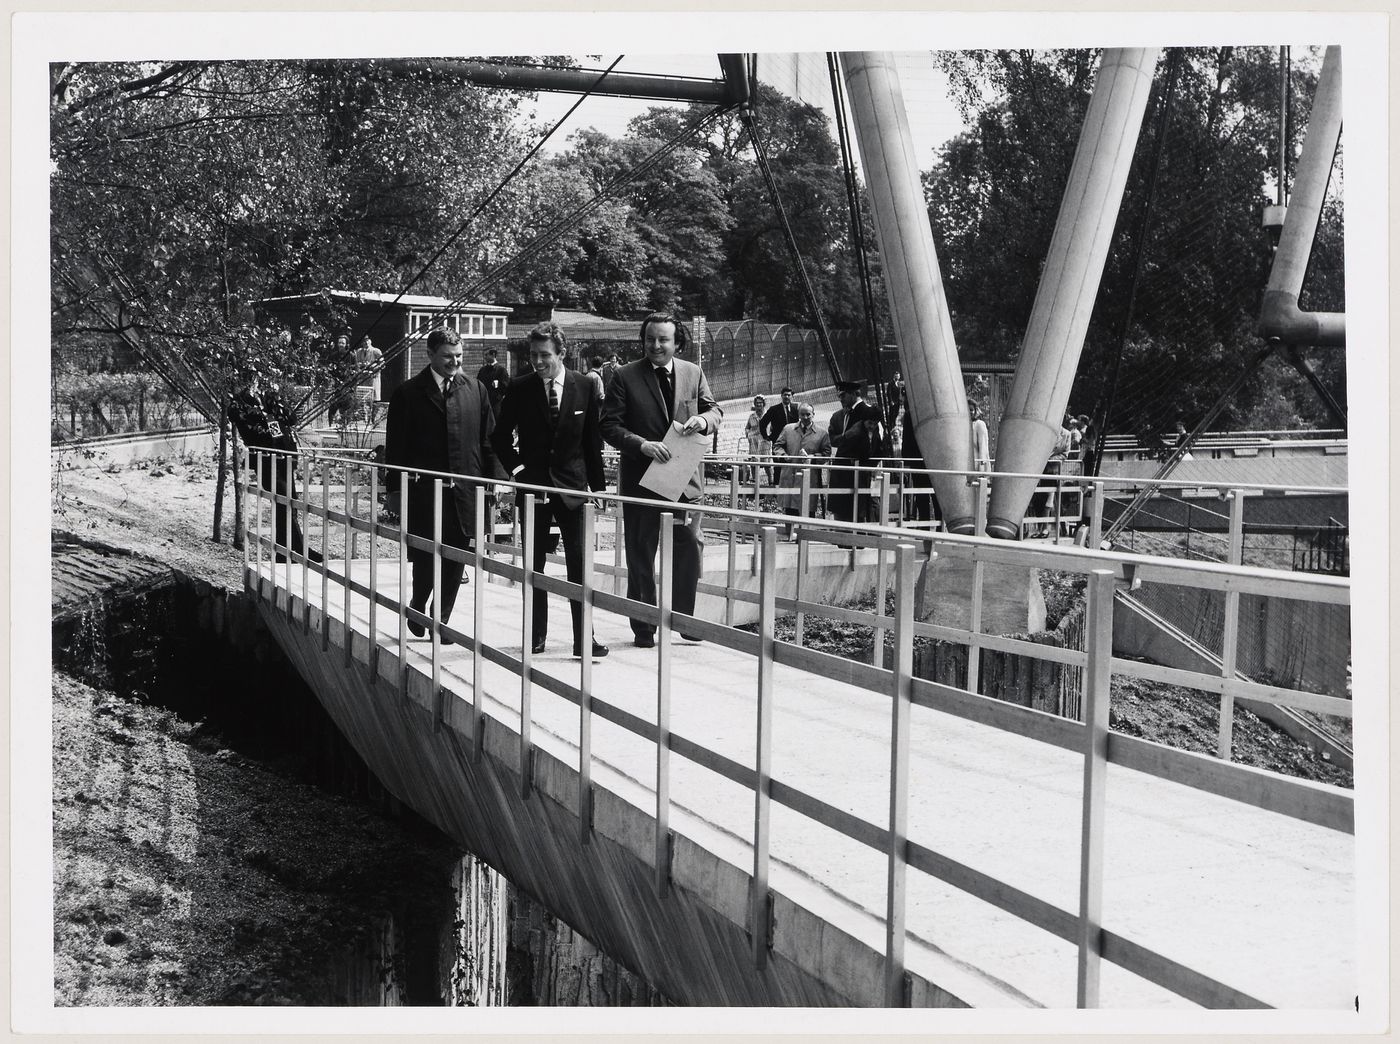 Frank Newby, Lord Snowdon, and Cedric Price at the Aviary, London Zoo, London, England